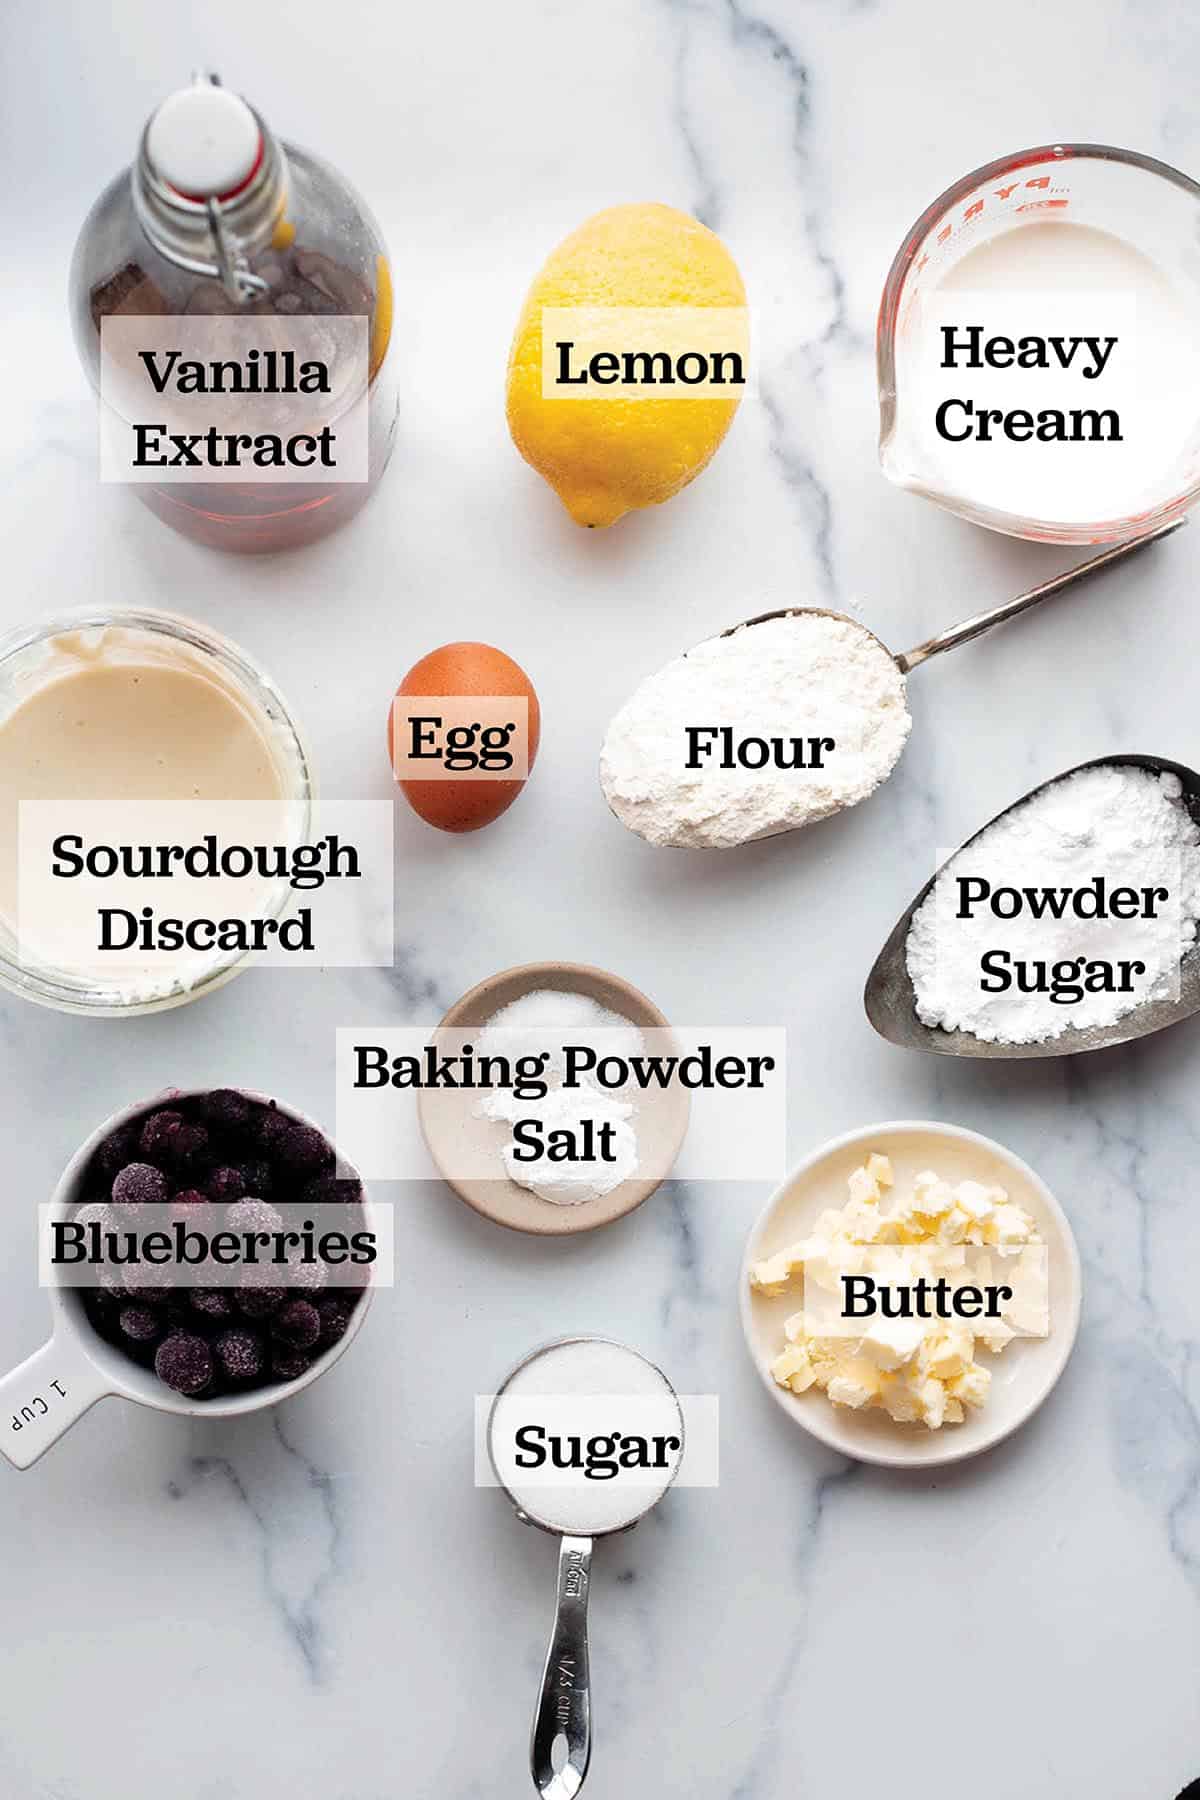 Ingredients in measuring cups and bowls to make blueberry scones.